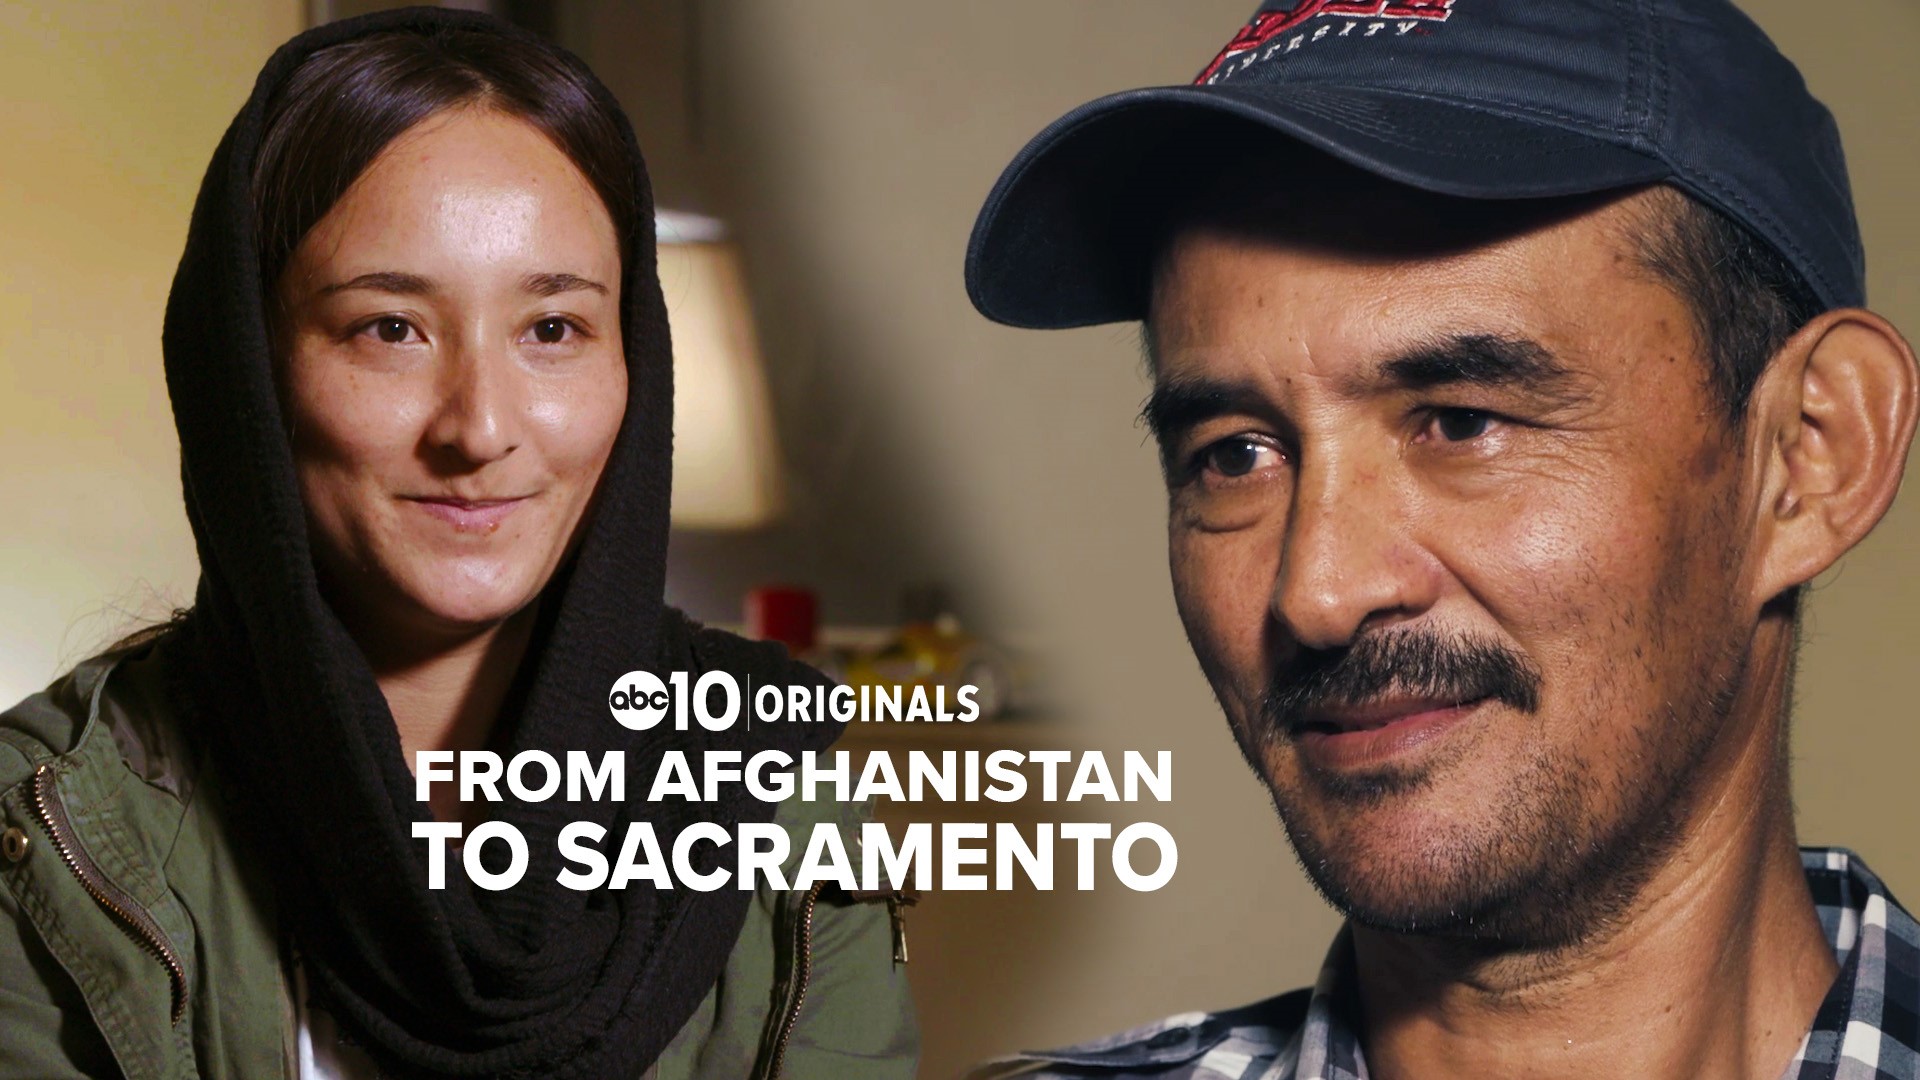 The world watched in horror as thousands crowded the Kabul airport as the Taliban took Afghanistan. Among them was a family that arrived days later in Sacramento